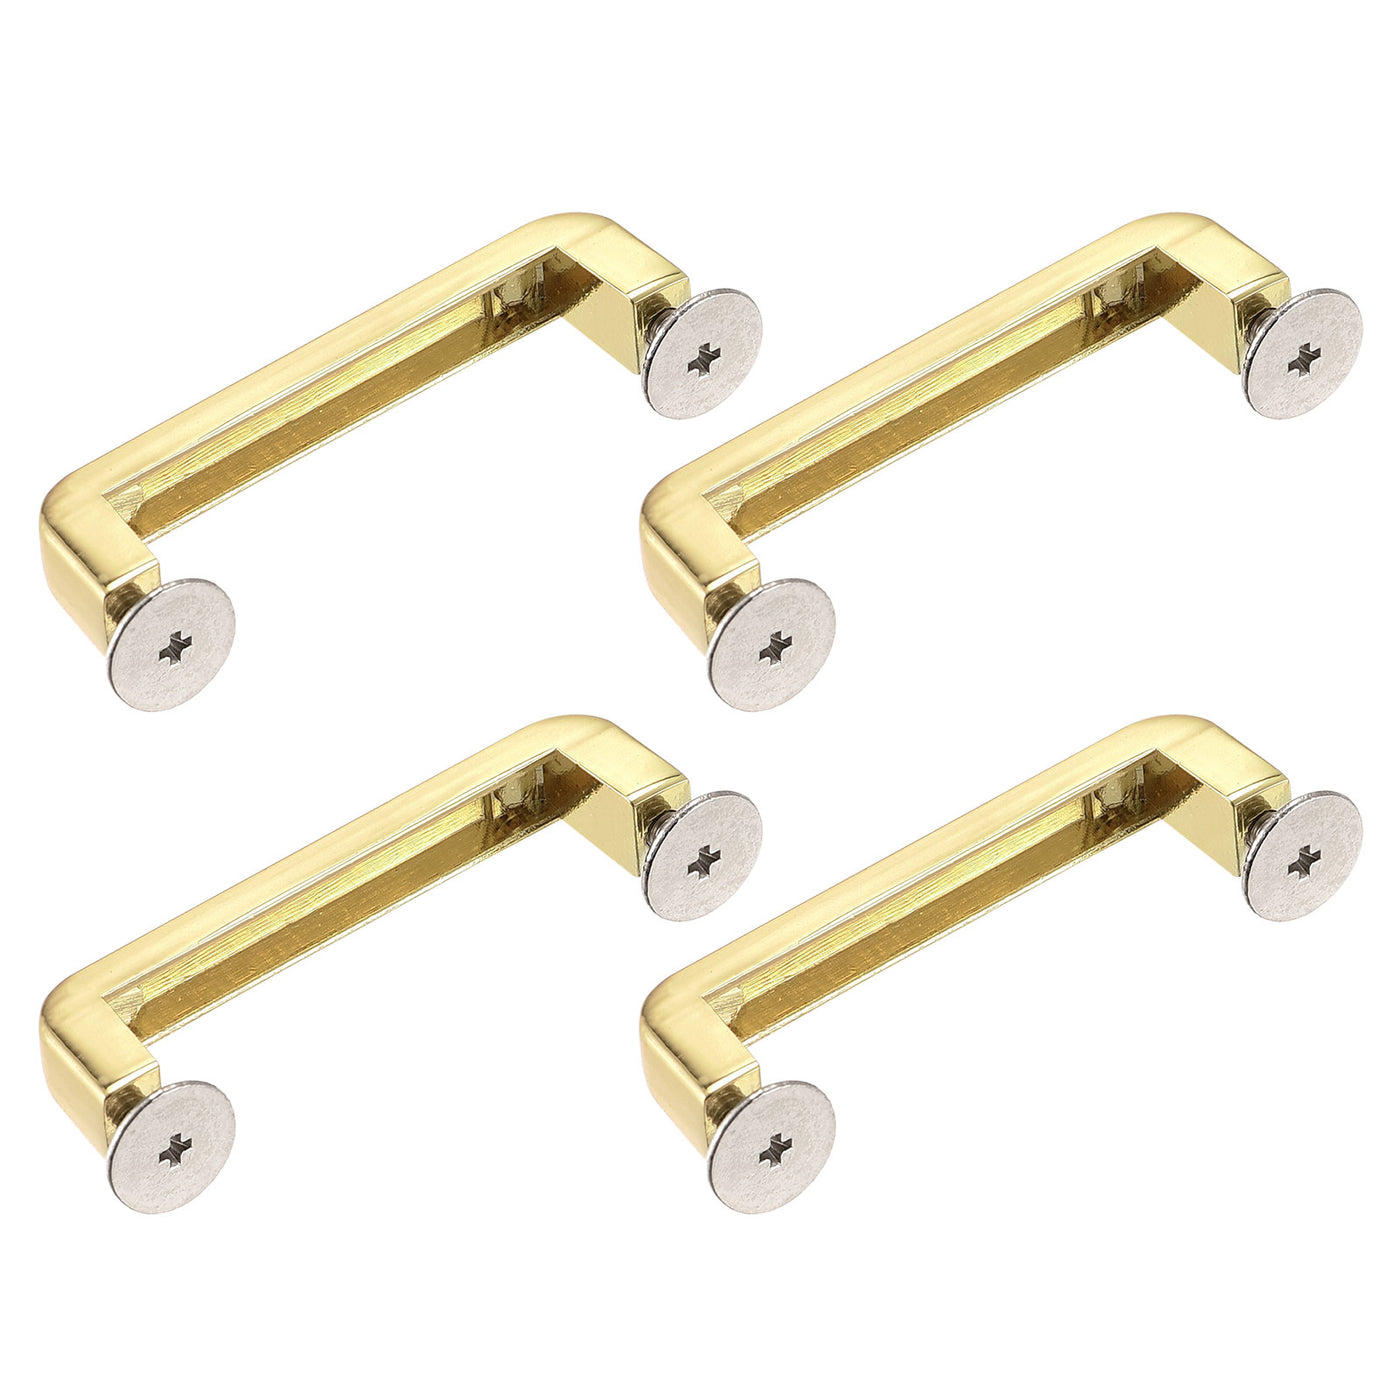 Uxcell Uxcell Arch Bridge Buckle, 4Pcs 47mm D-Ring Connector Buckles for Bag Hanger DIY, Gold